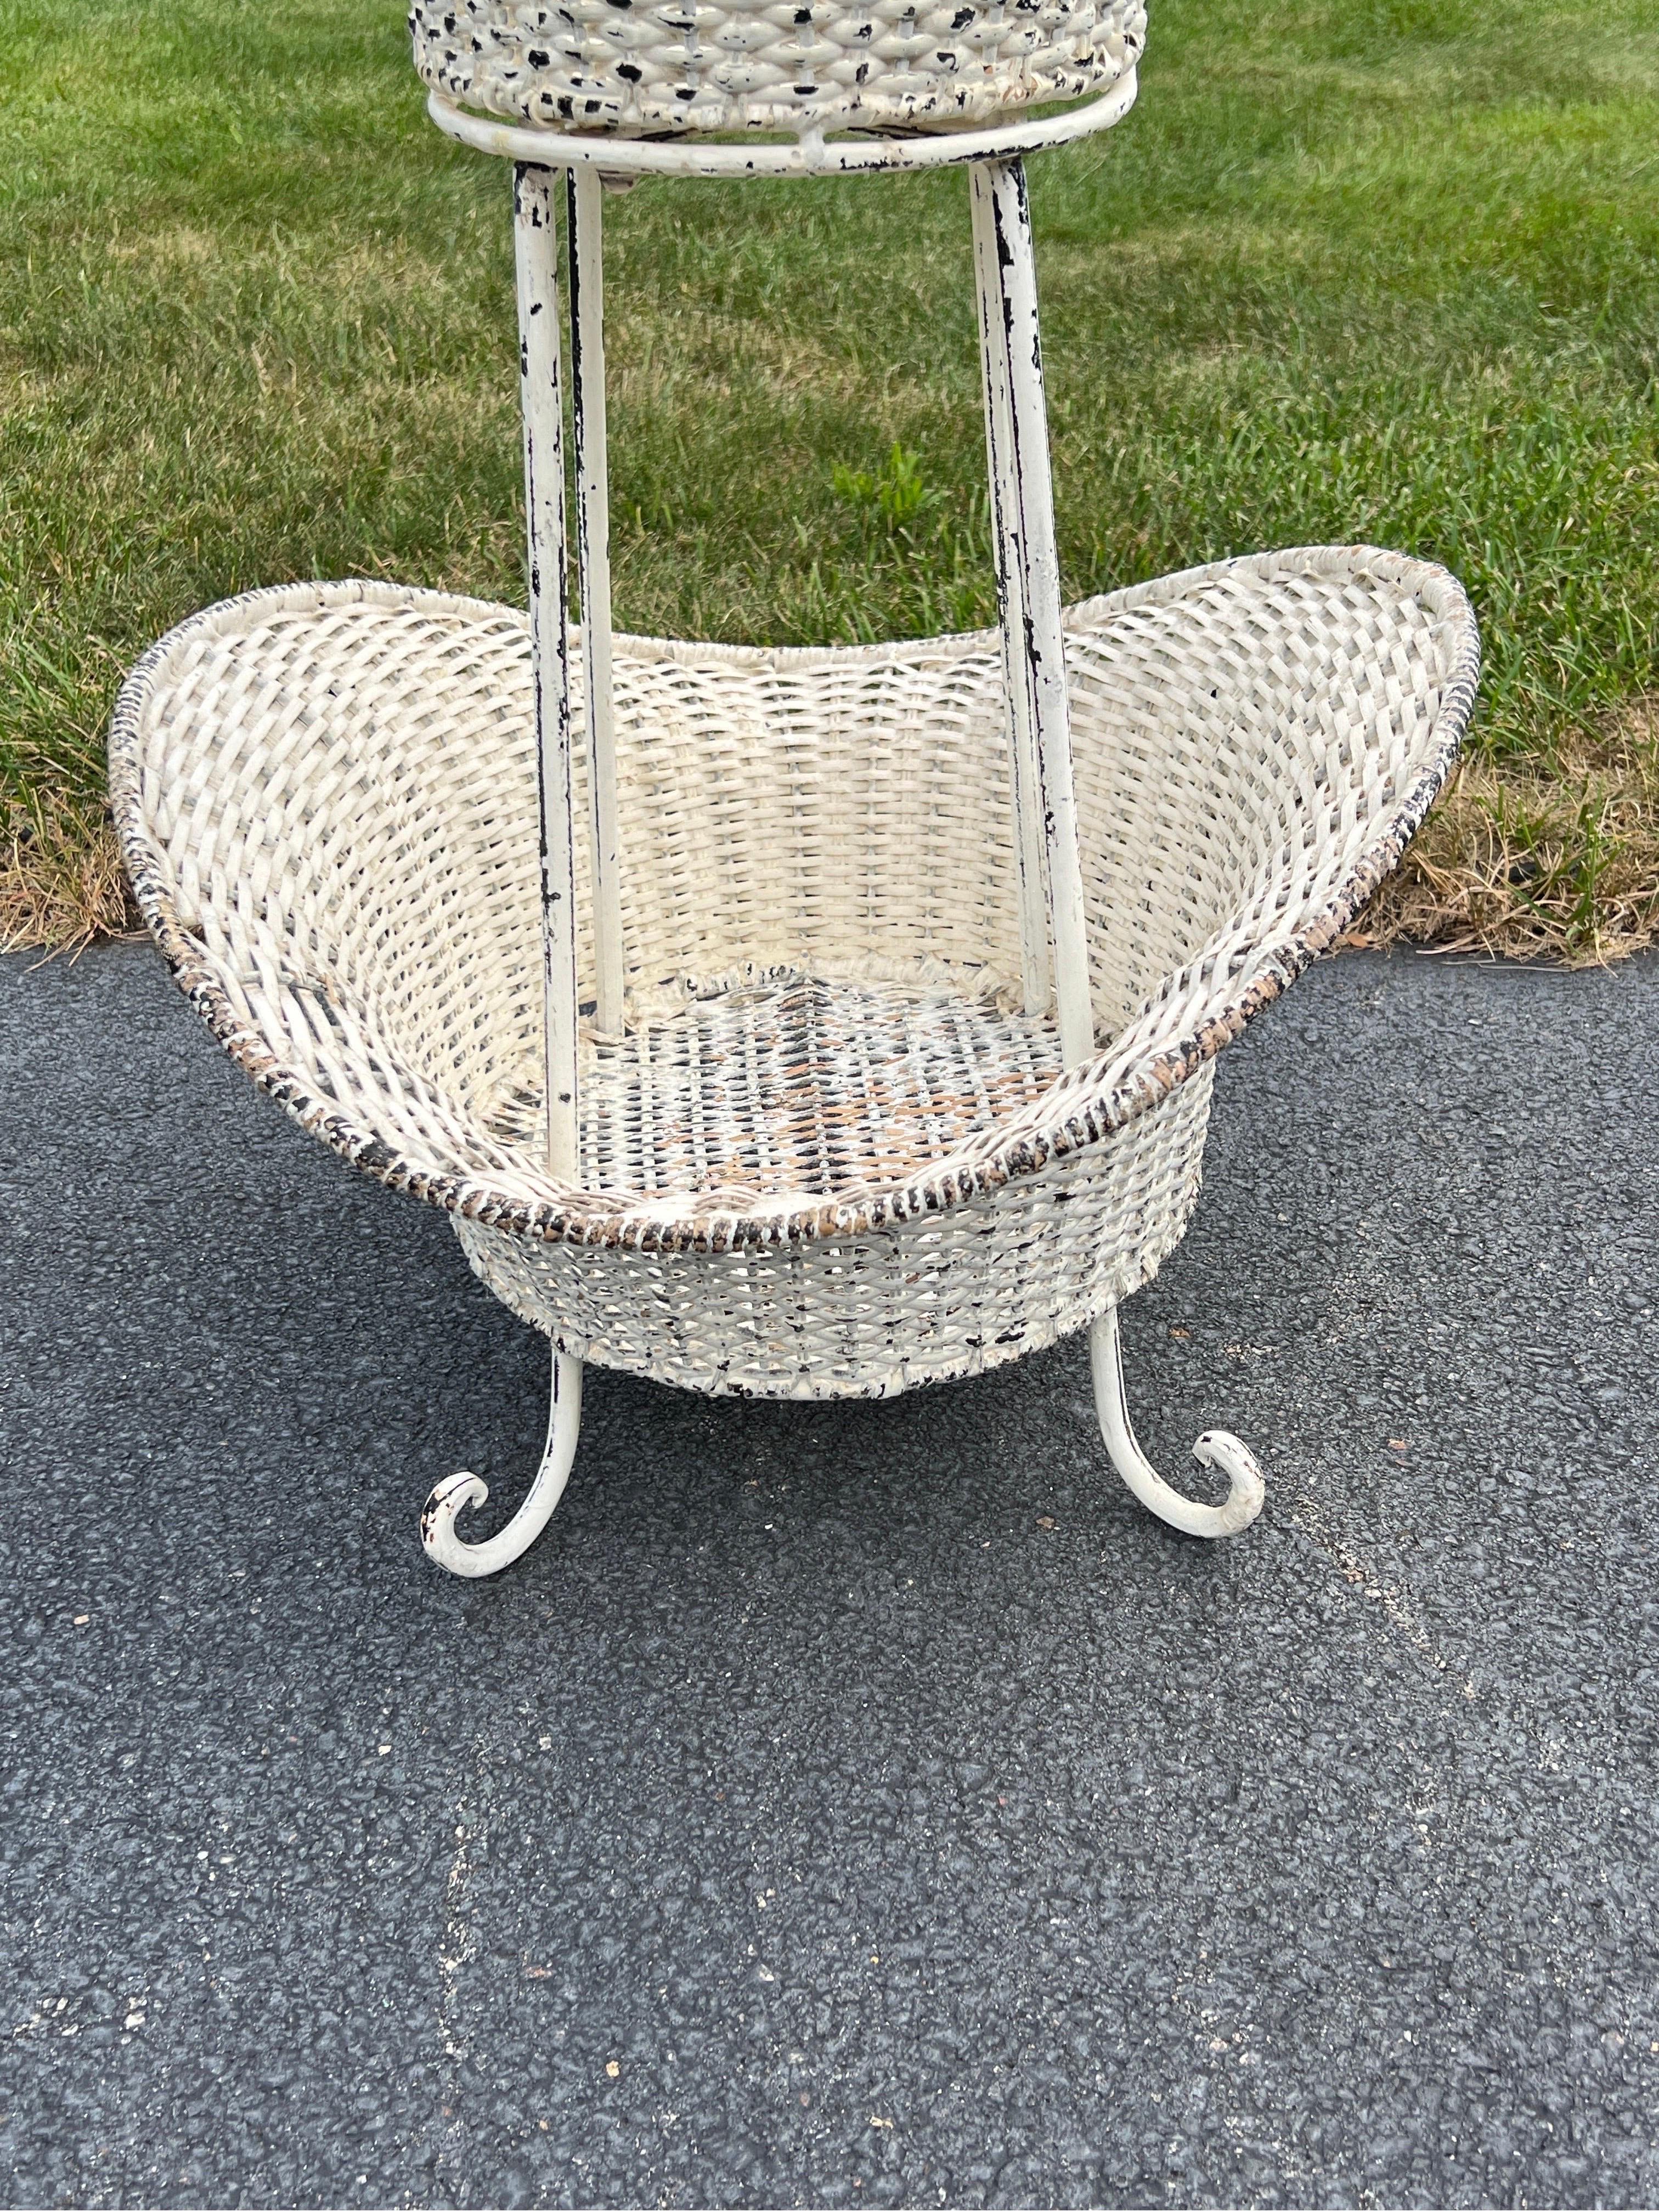 American Antique Iron, Wicker Swedish Gustavian Style 4 Tiered Basket Topiary 3 Available For Sale